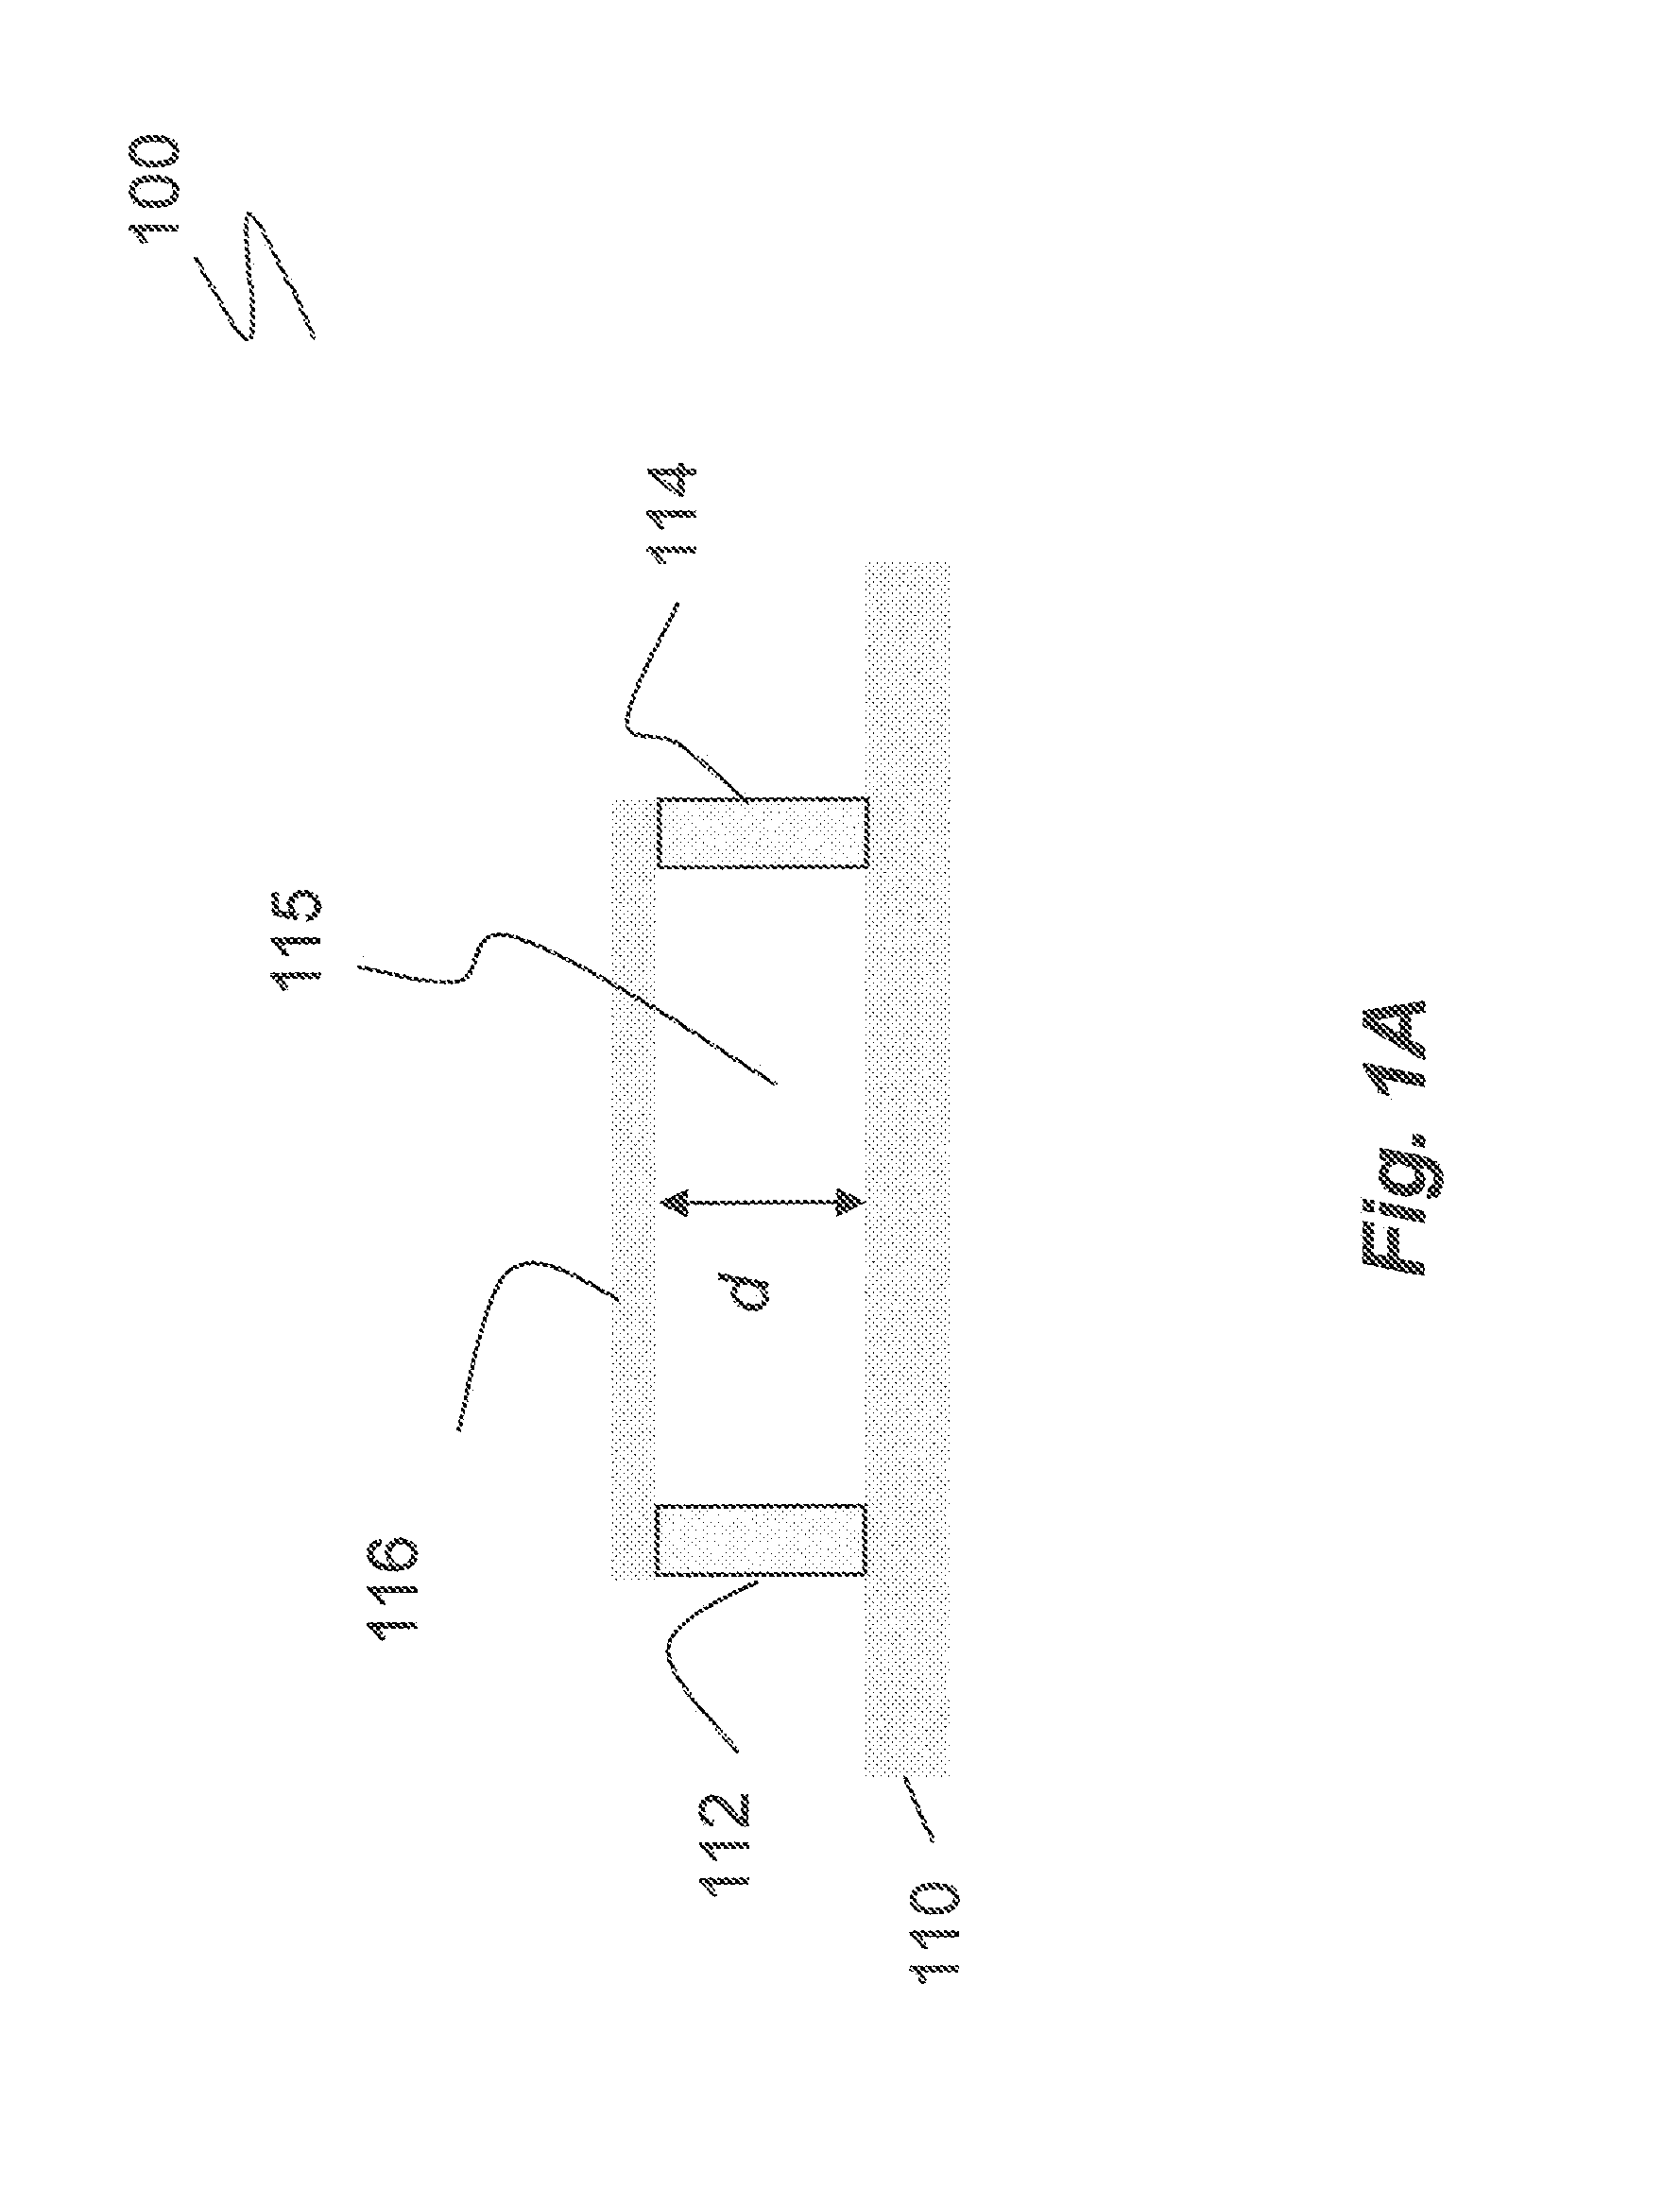 Method and apparatus for release-assisted microcontact printing of MEMS